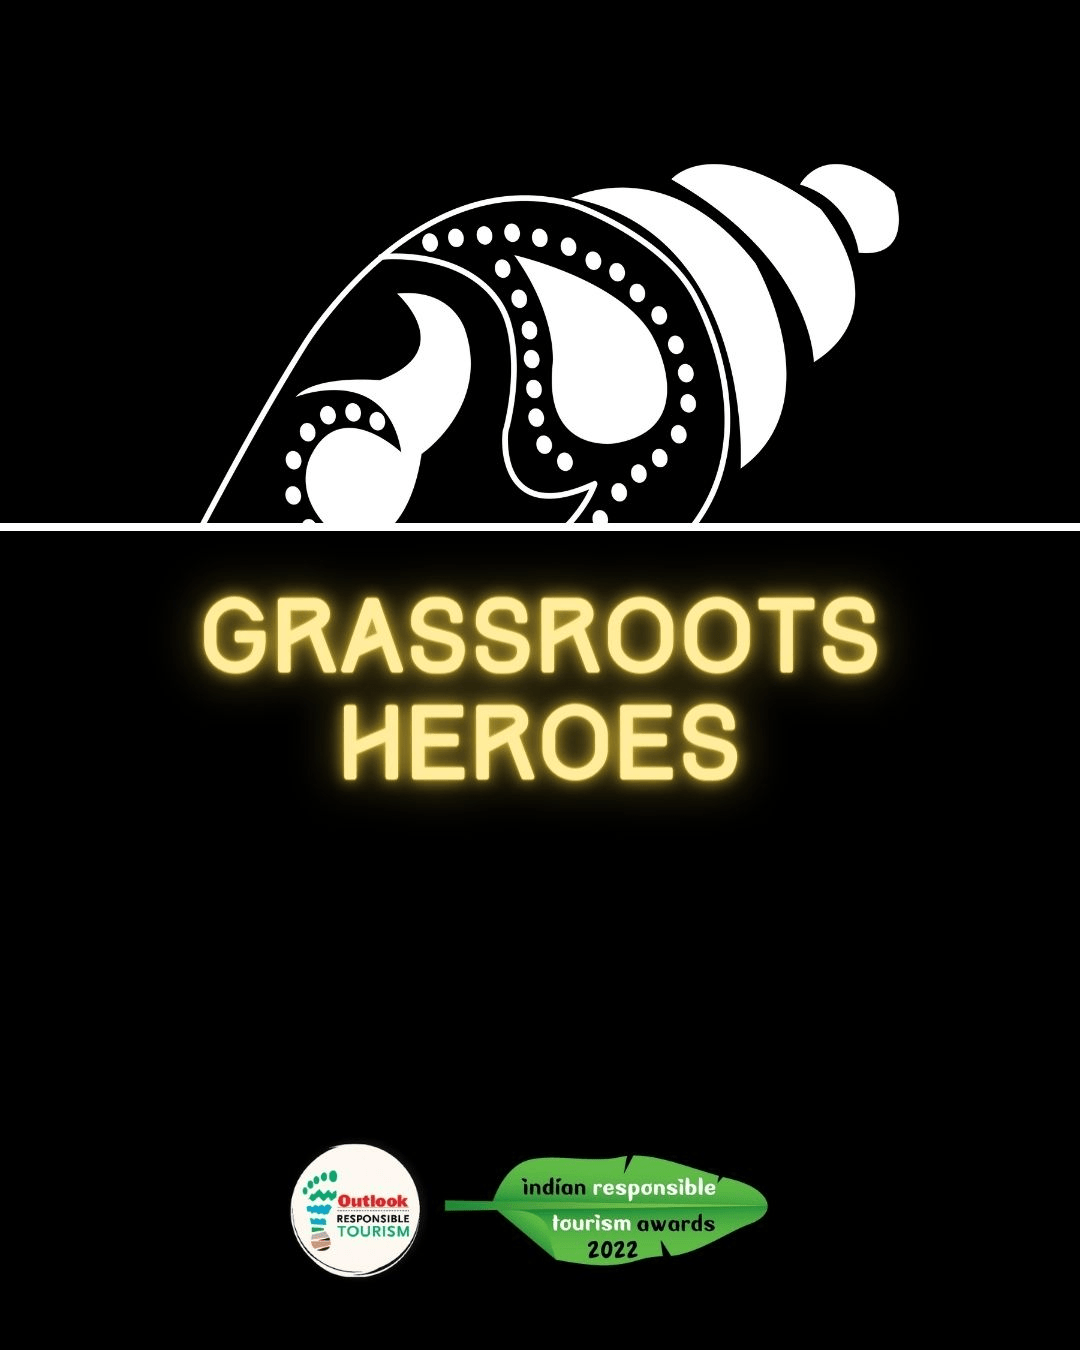 Grassroots Heroes